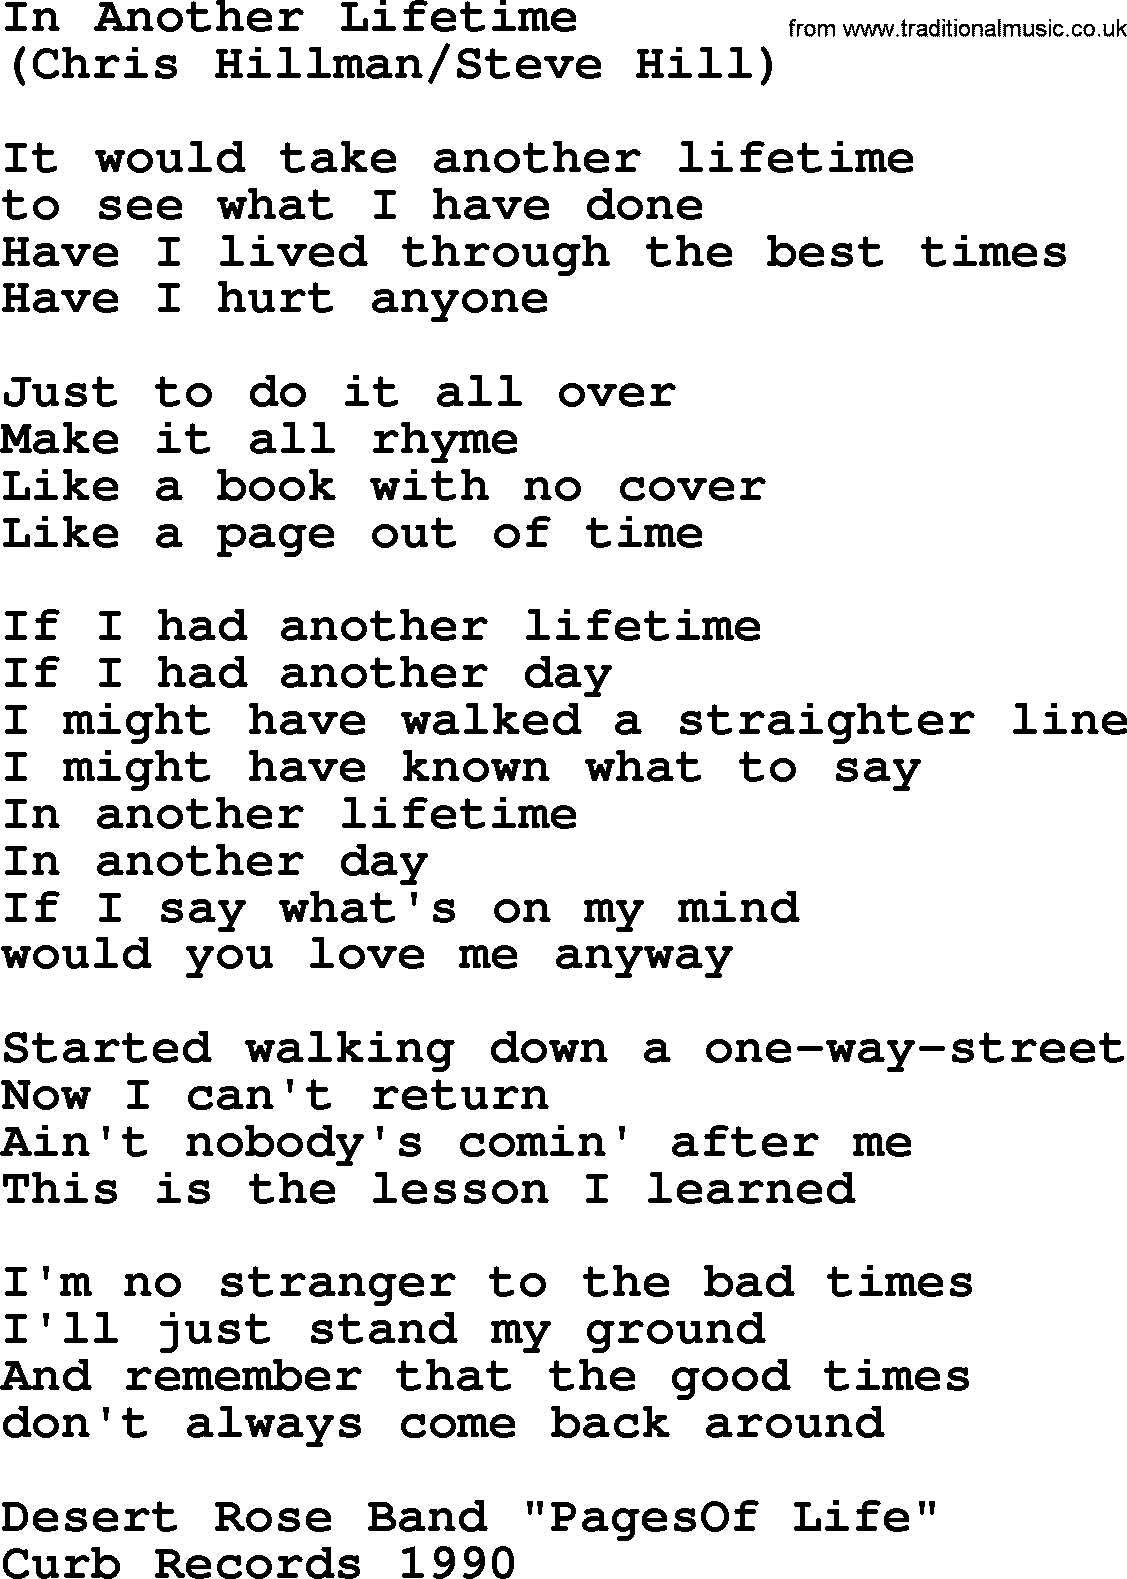 The Byrds song In Another Lifetime, lyrics